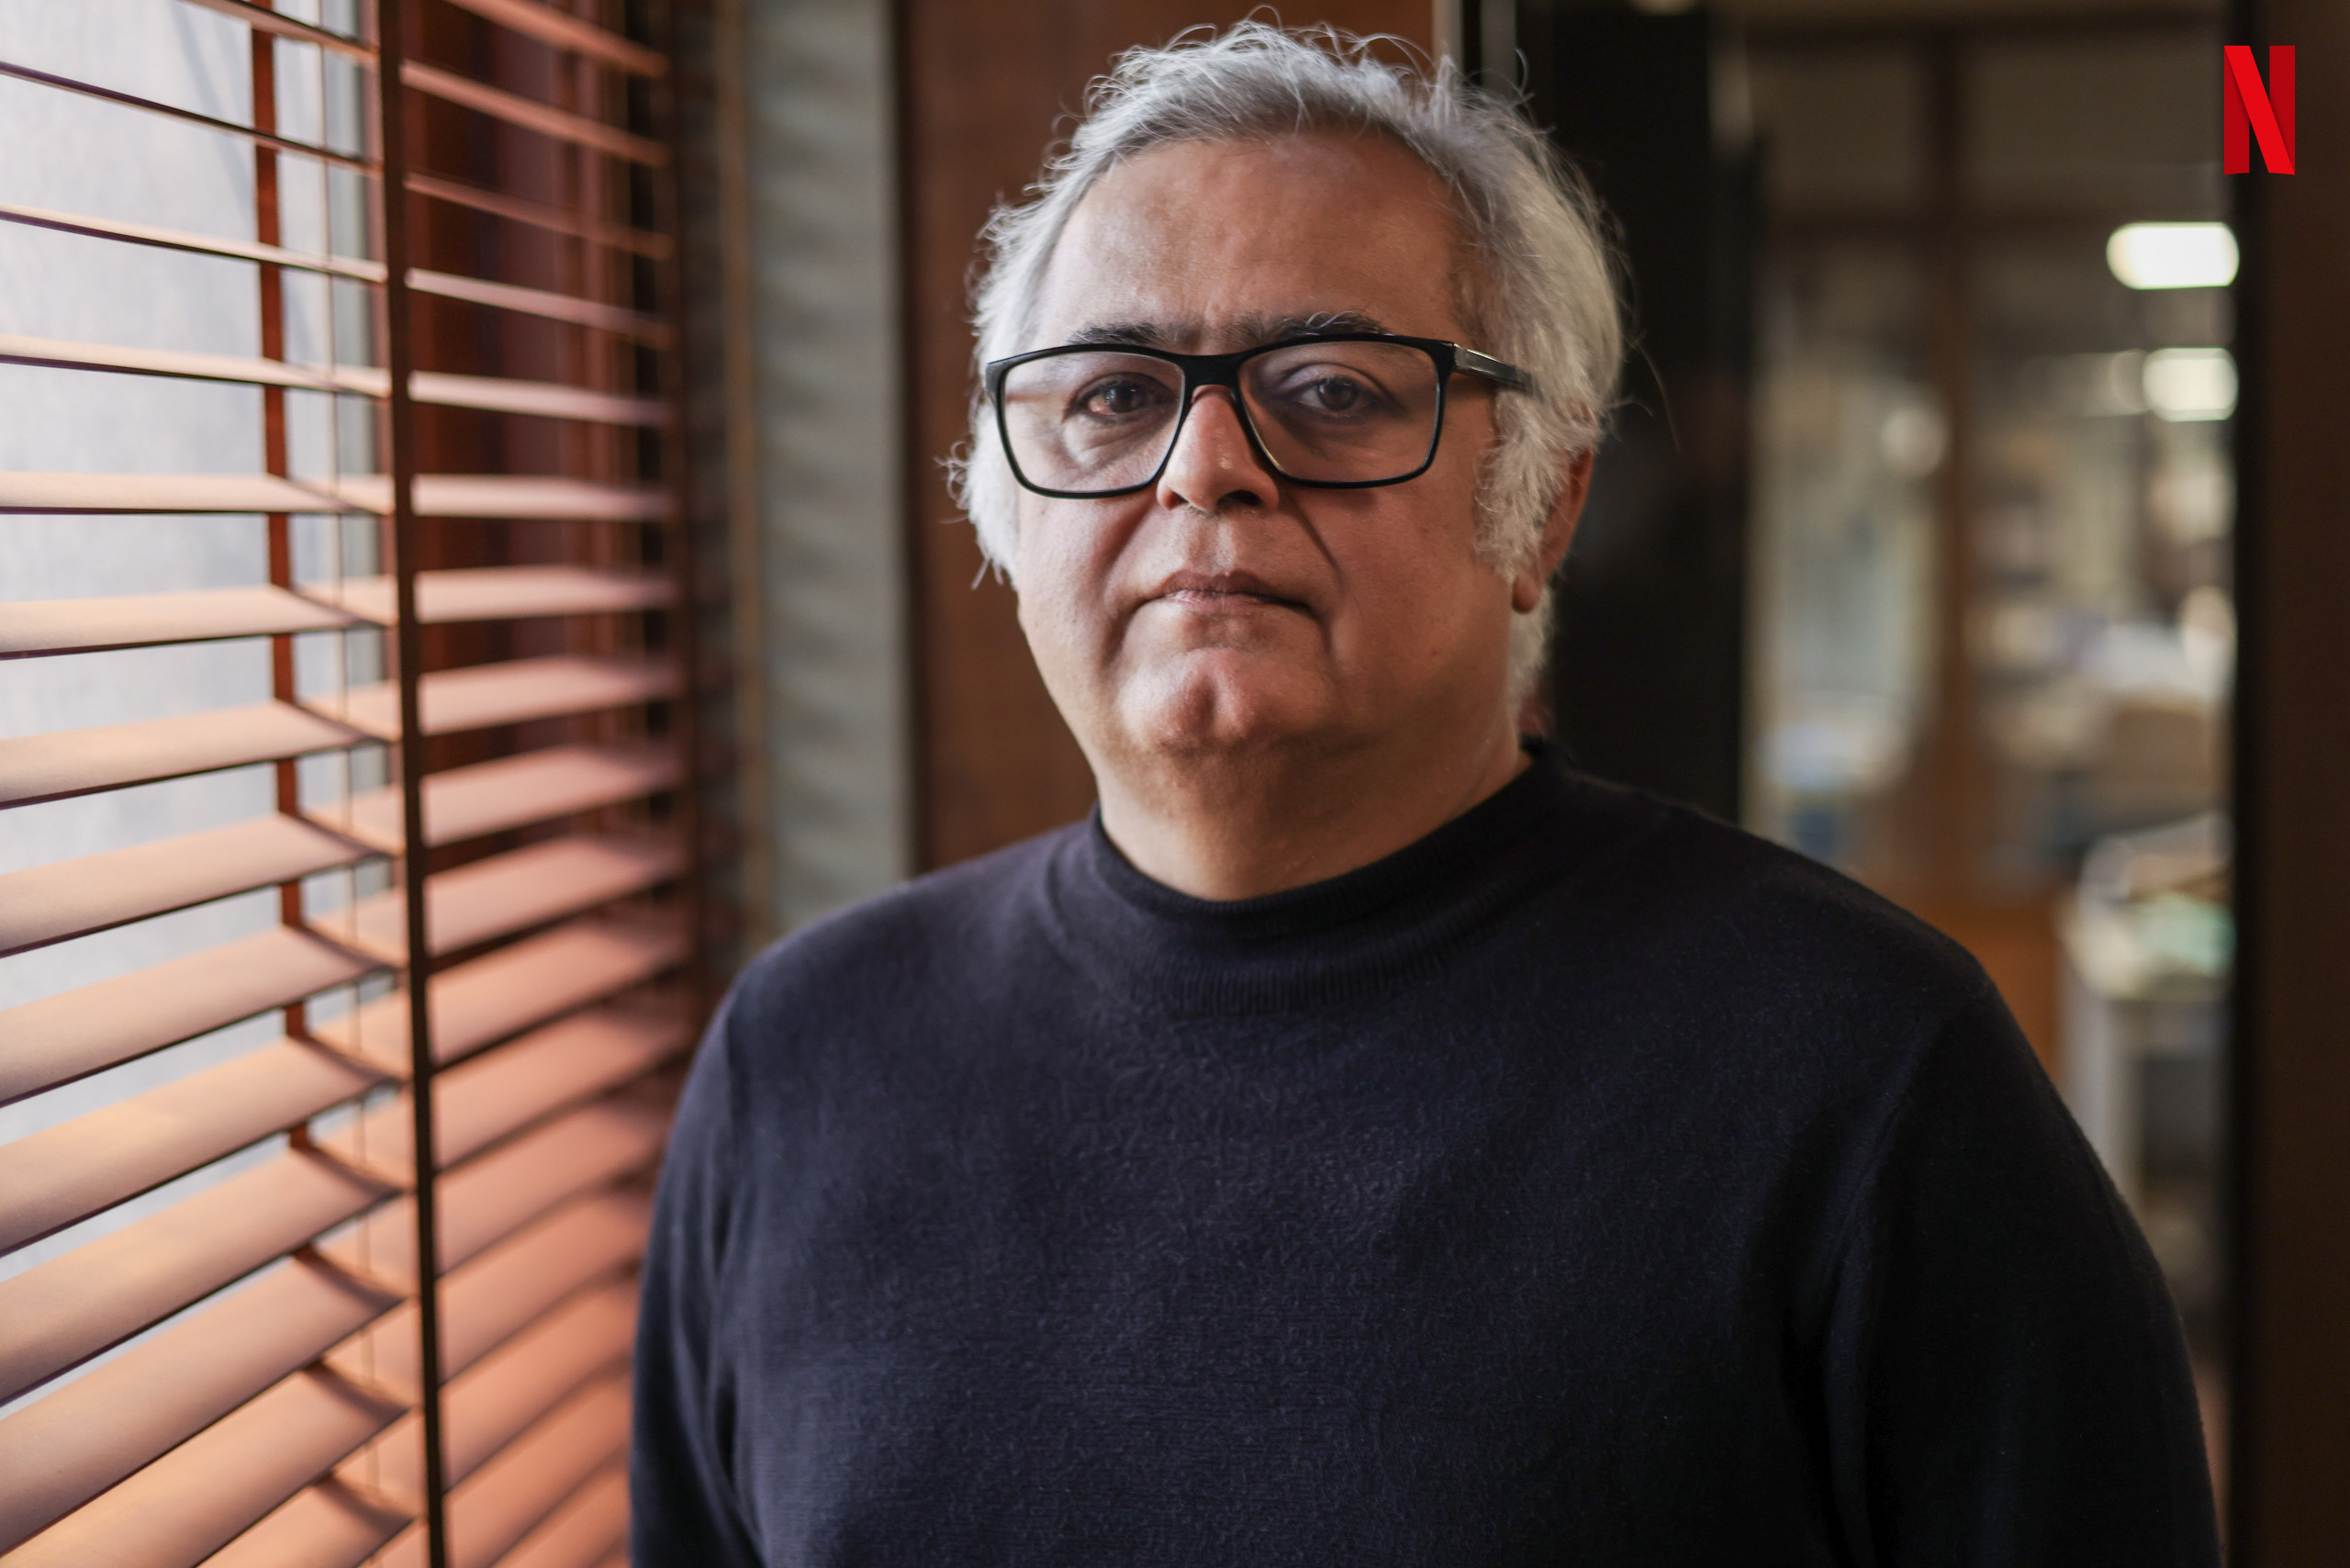 ‘Scoop’: Hansal Mehta, Matchbox Shots And Netflix Come Together For A Riveting Character Drama